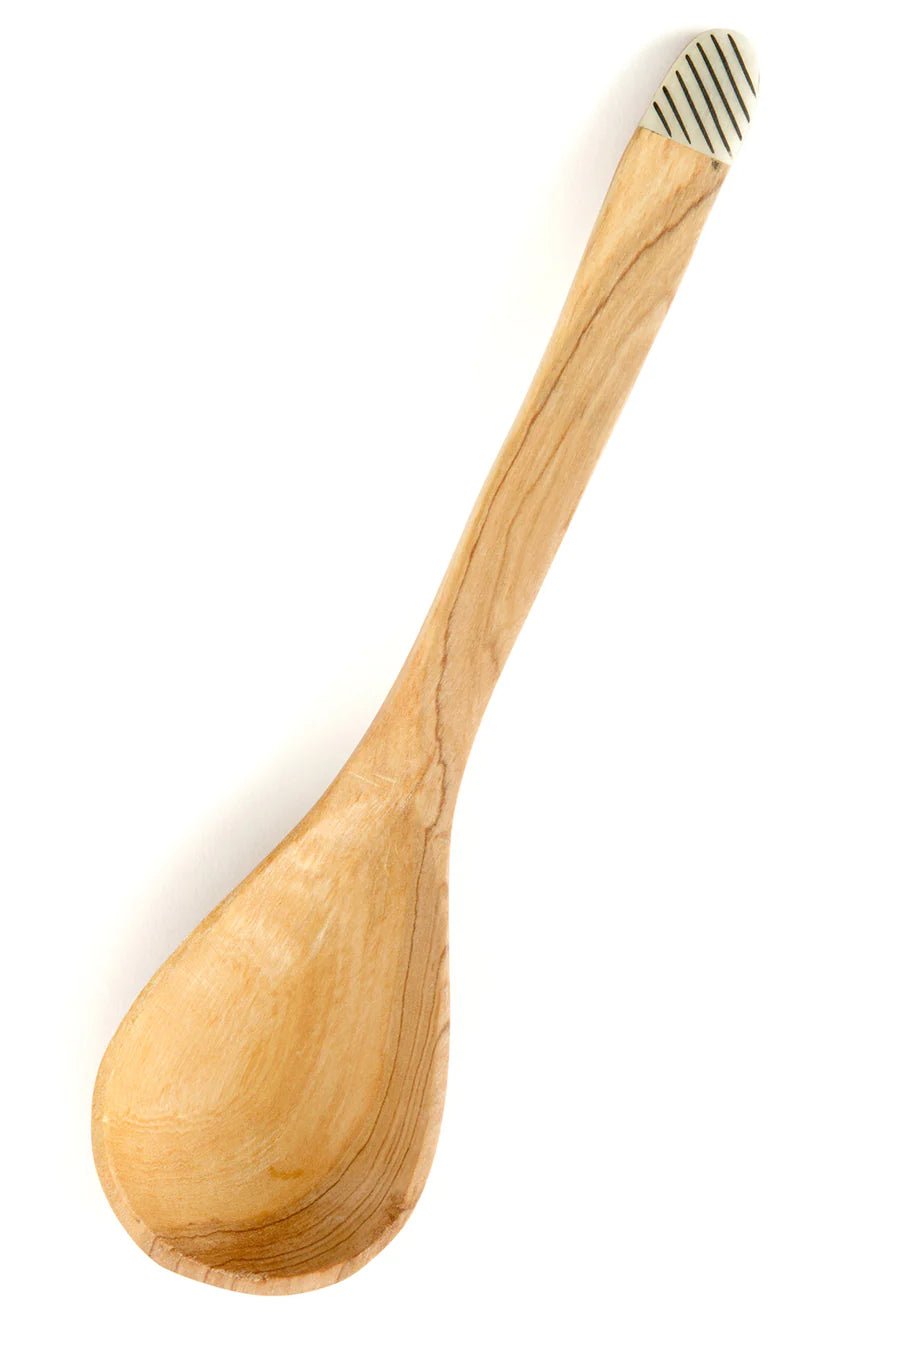 Wild Olive Wood Cultured Serving Spoon